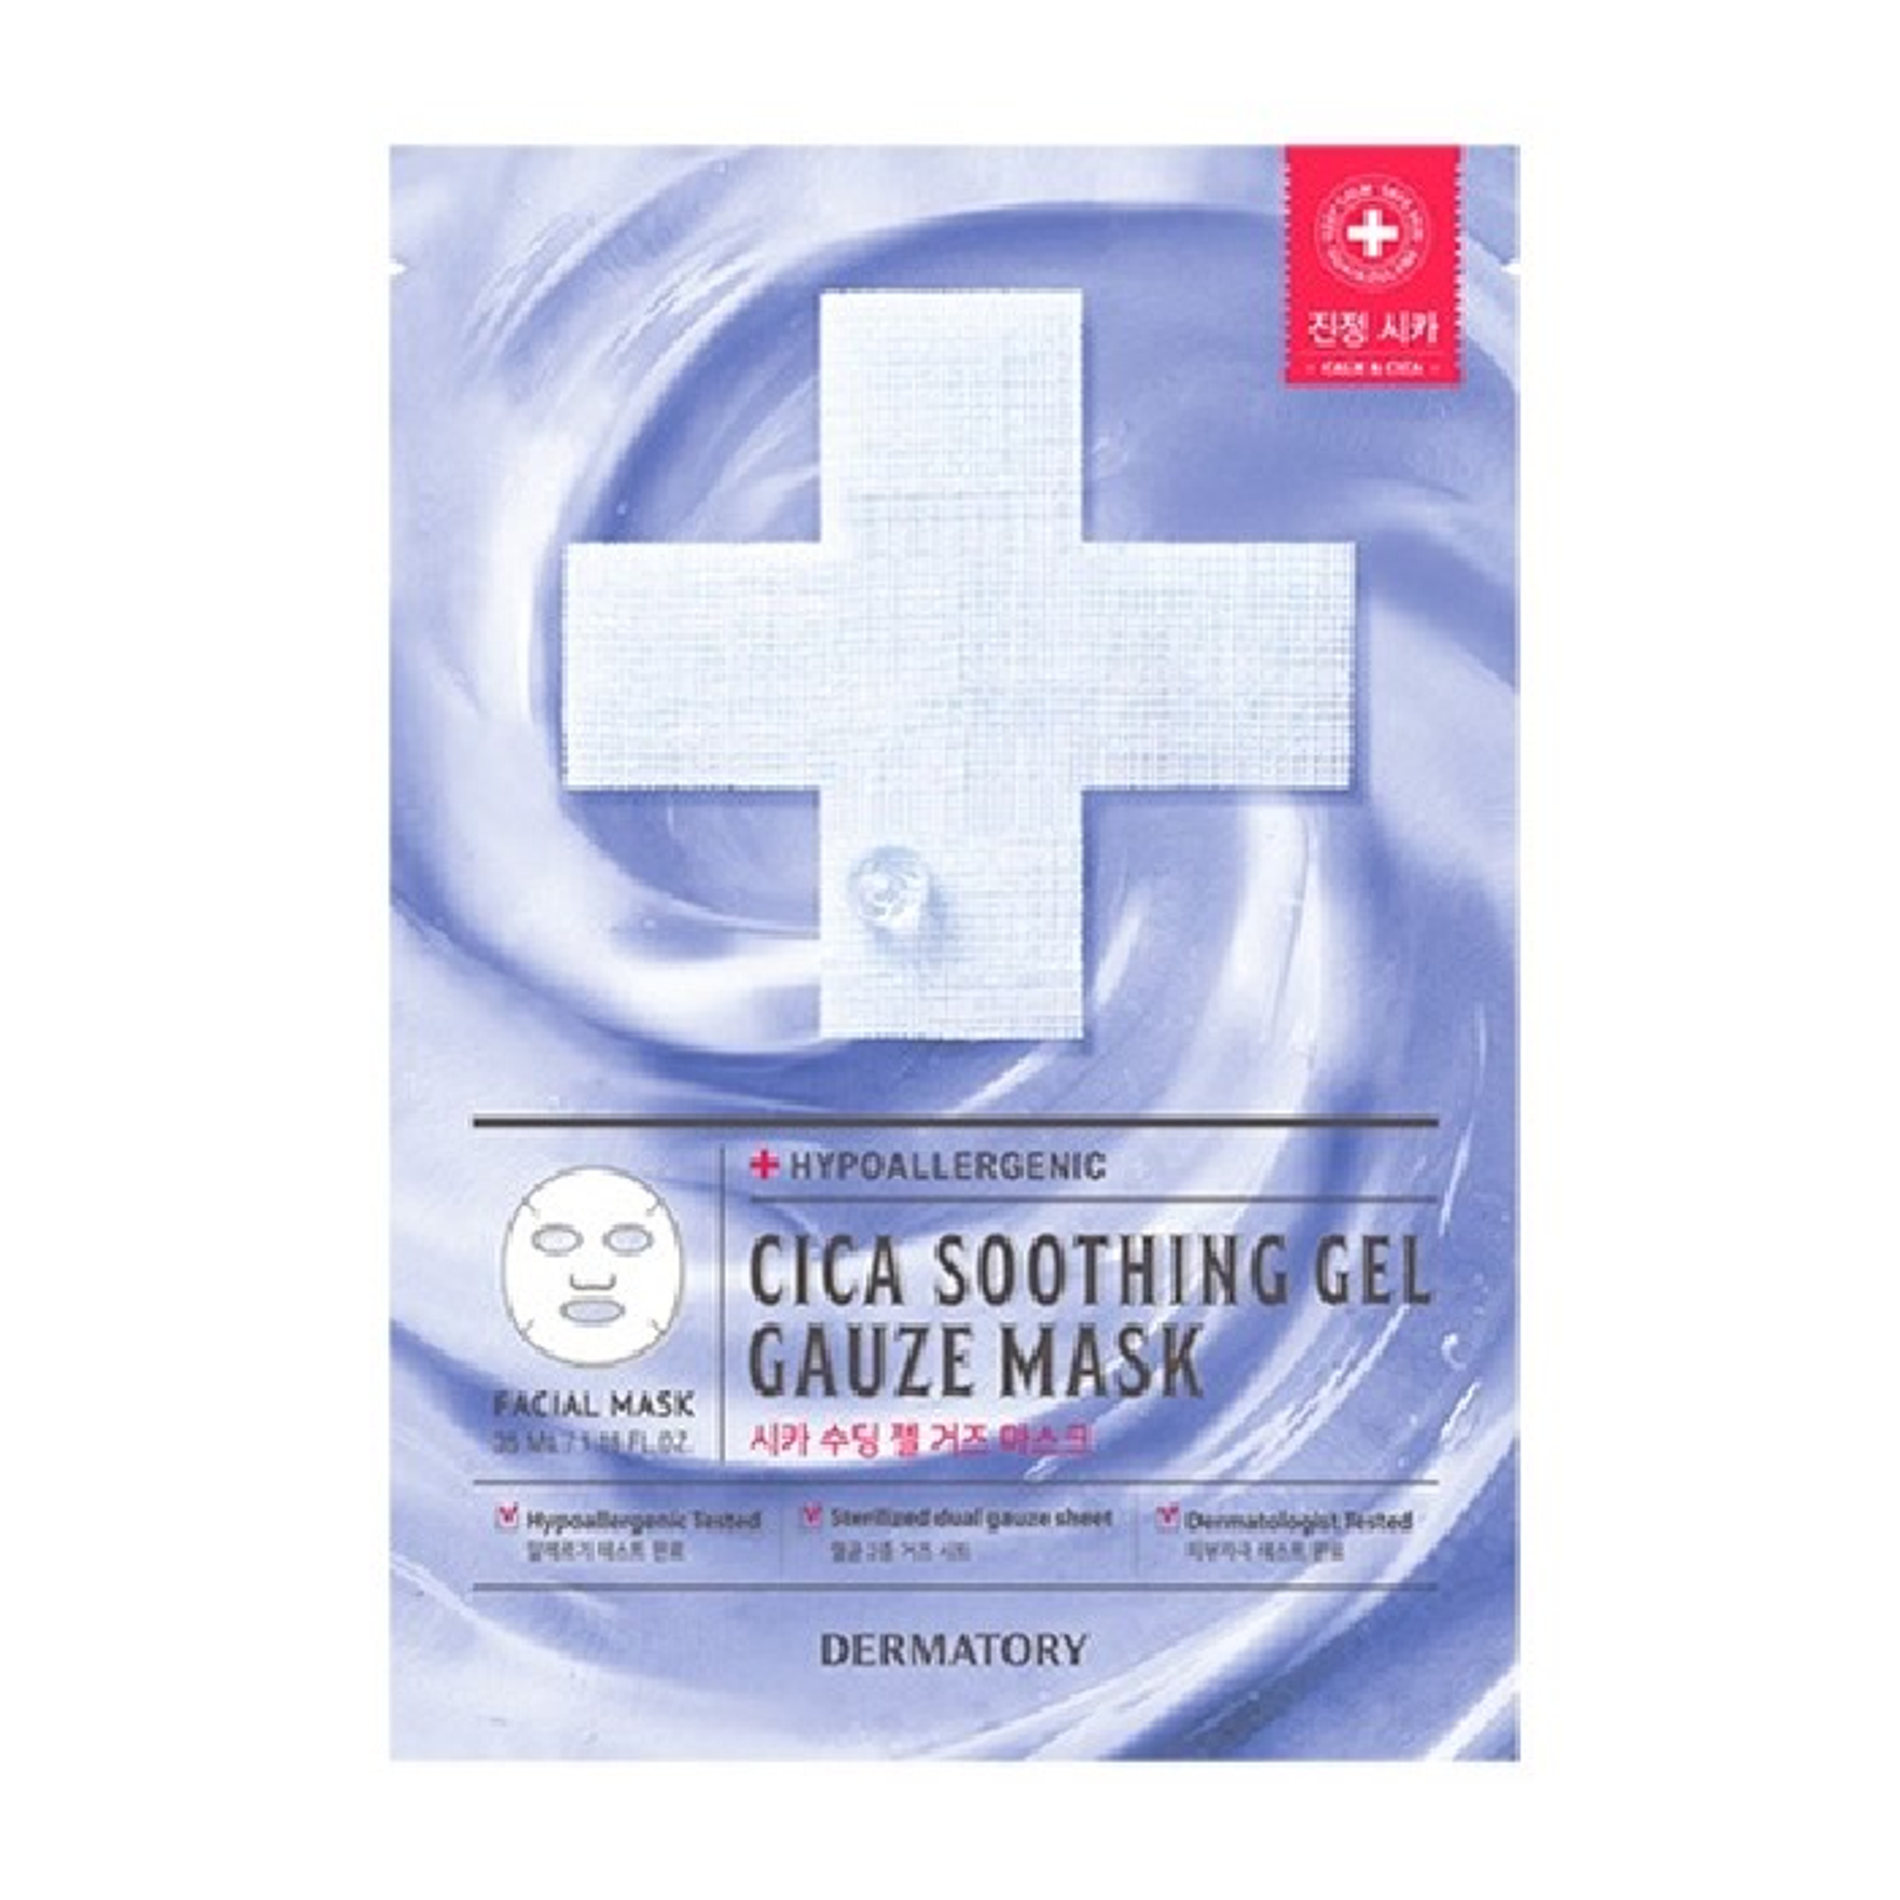 mat-na-giay-dermatory-hypoallergenic-cica-soothing-gel-gauze-mask-35ml-2